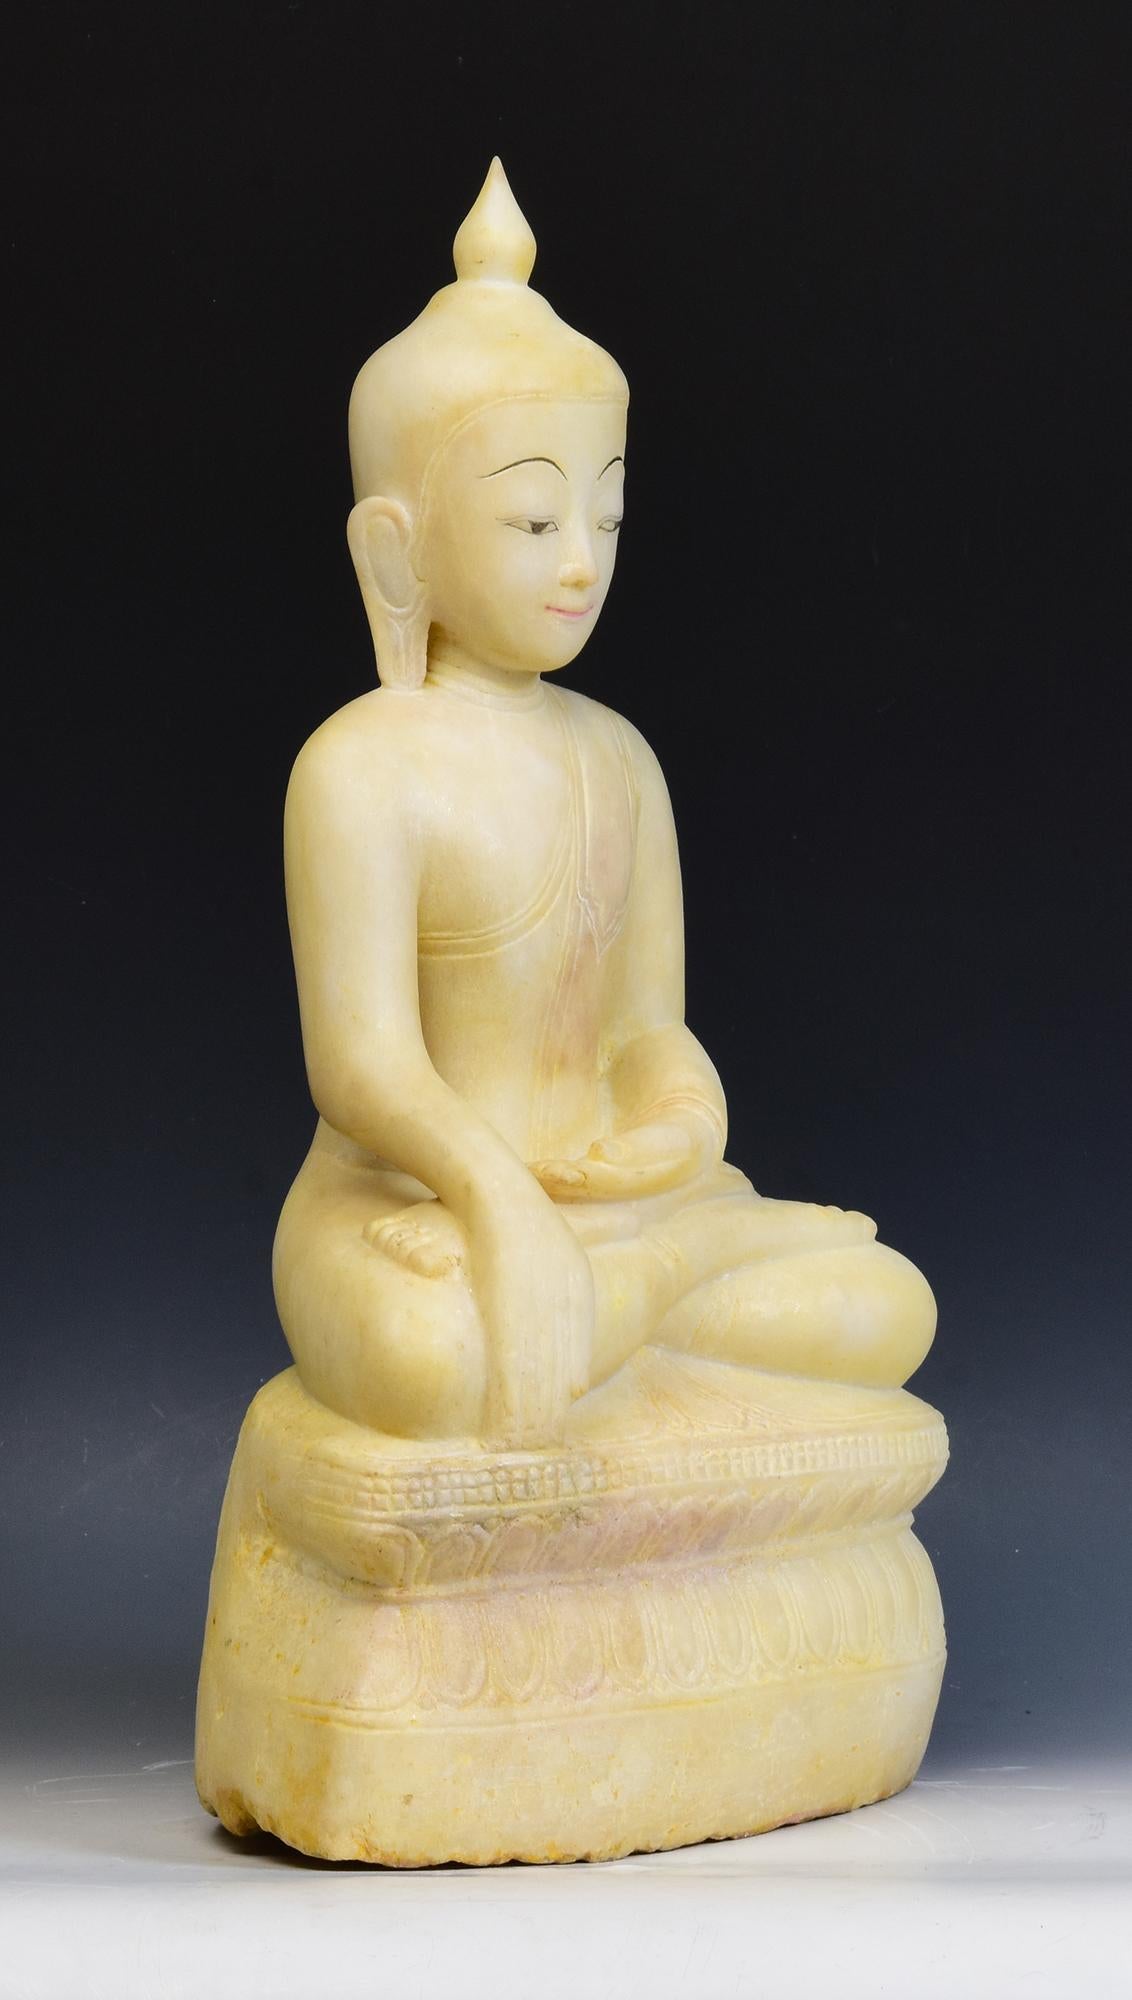 17th - 18th Century, Shan, Antique Burmese Alabaster Marble Seated Buddha Statue 8